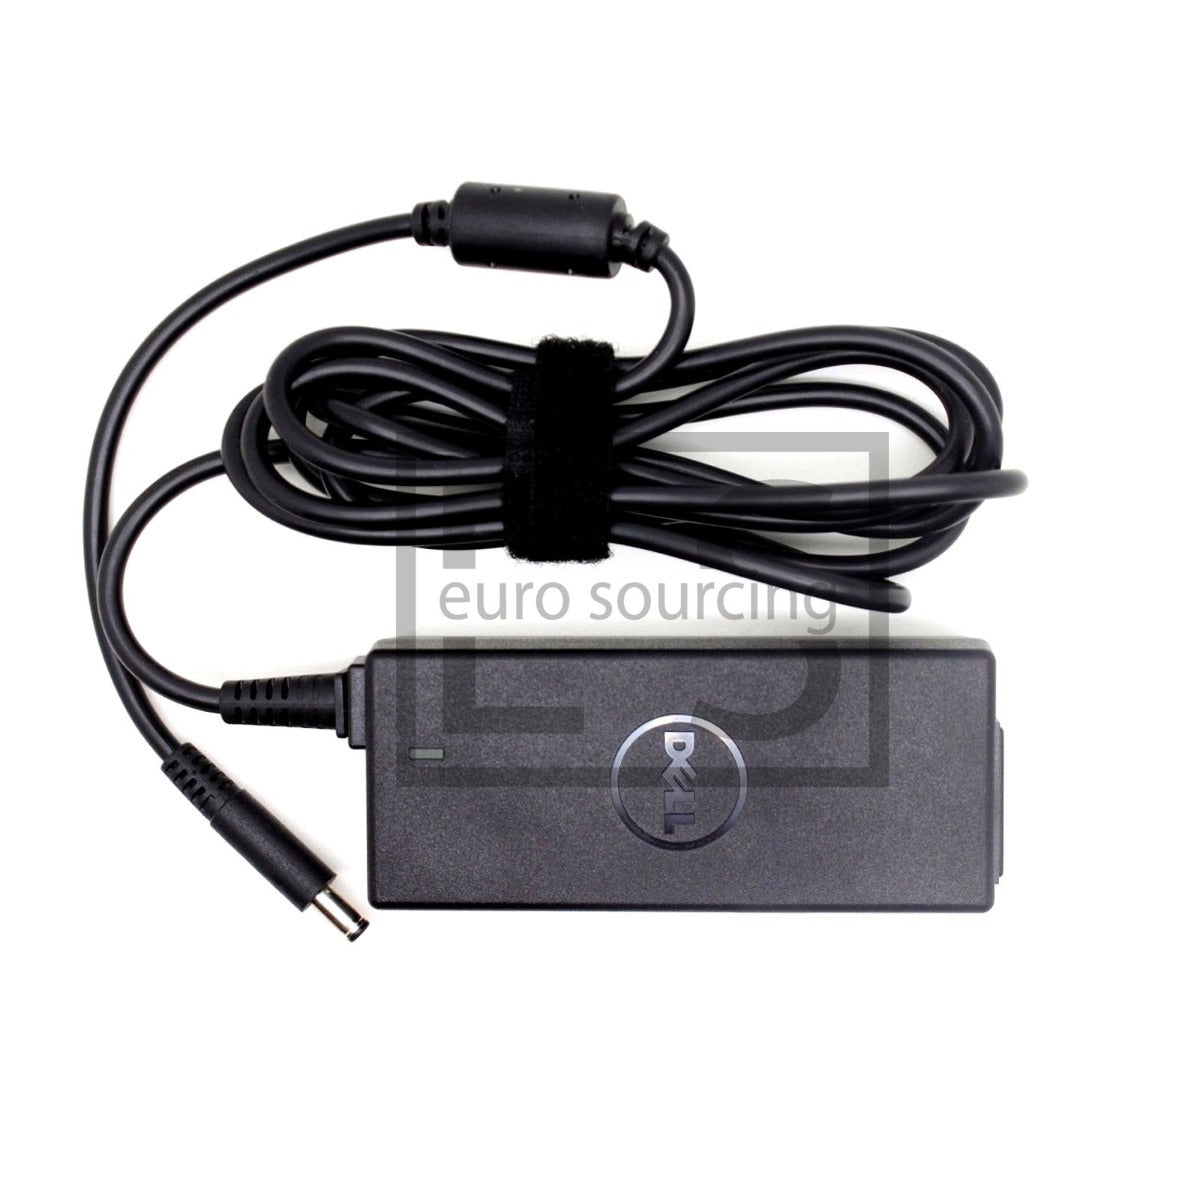 Genuine DELL 19.5V 2.31A DELC231 *ROUND* TYPE DELL BRAND 45W AC ADAPTER 4.5MM x 3.0MM Compatible With DELL 0CC0DT CC0DT